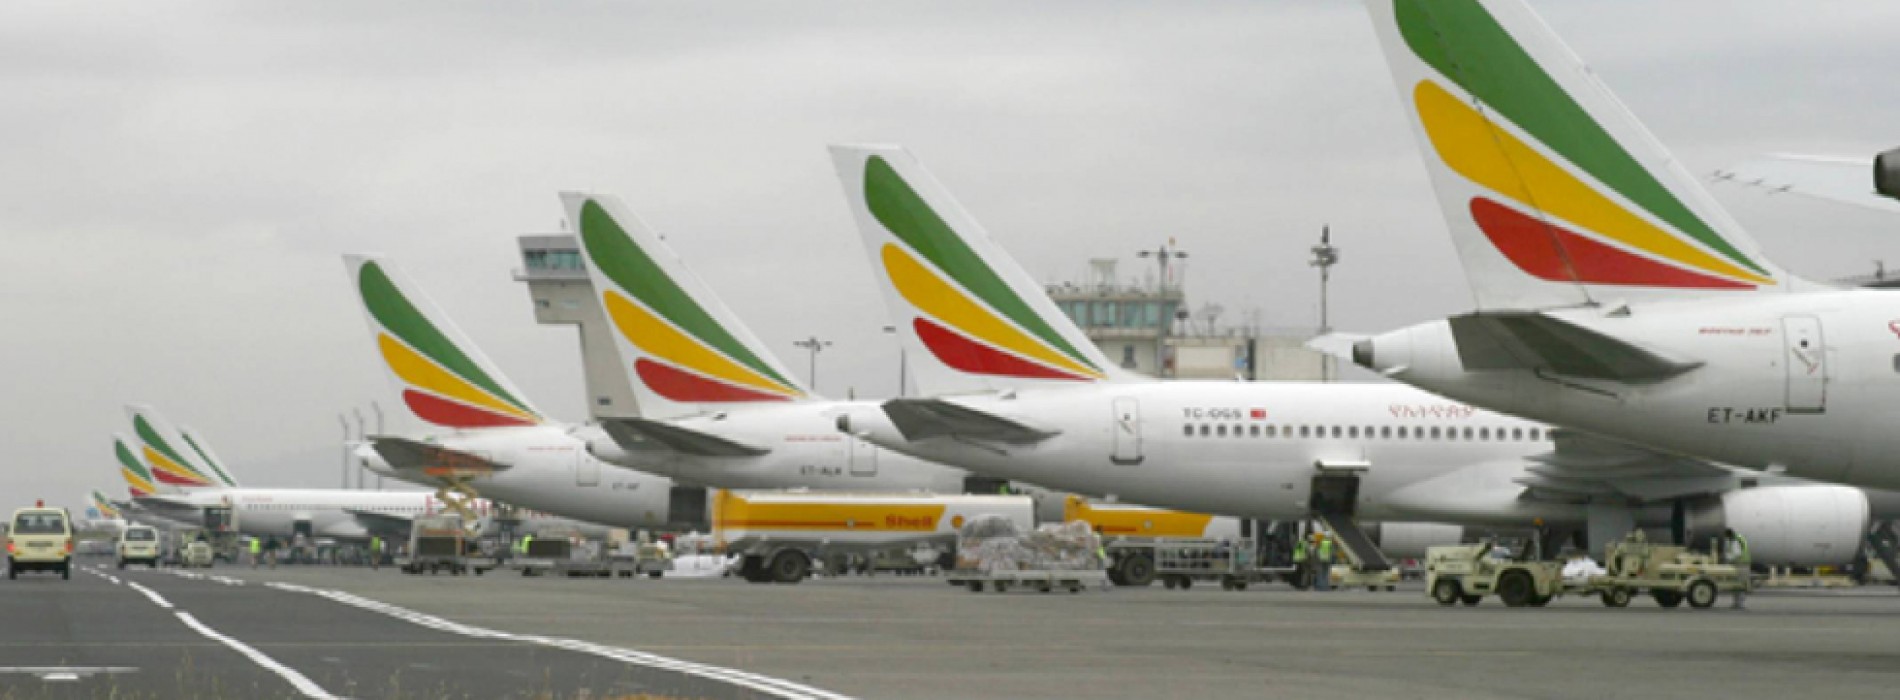 Ethiopian Airlines signs deal to revive Zambia’s national carrier